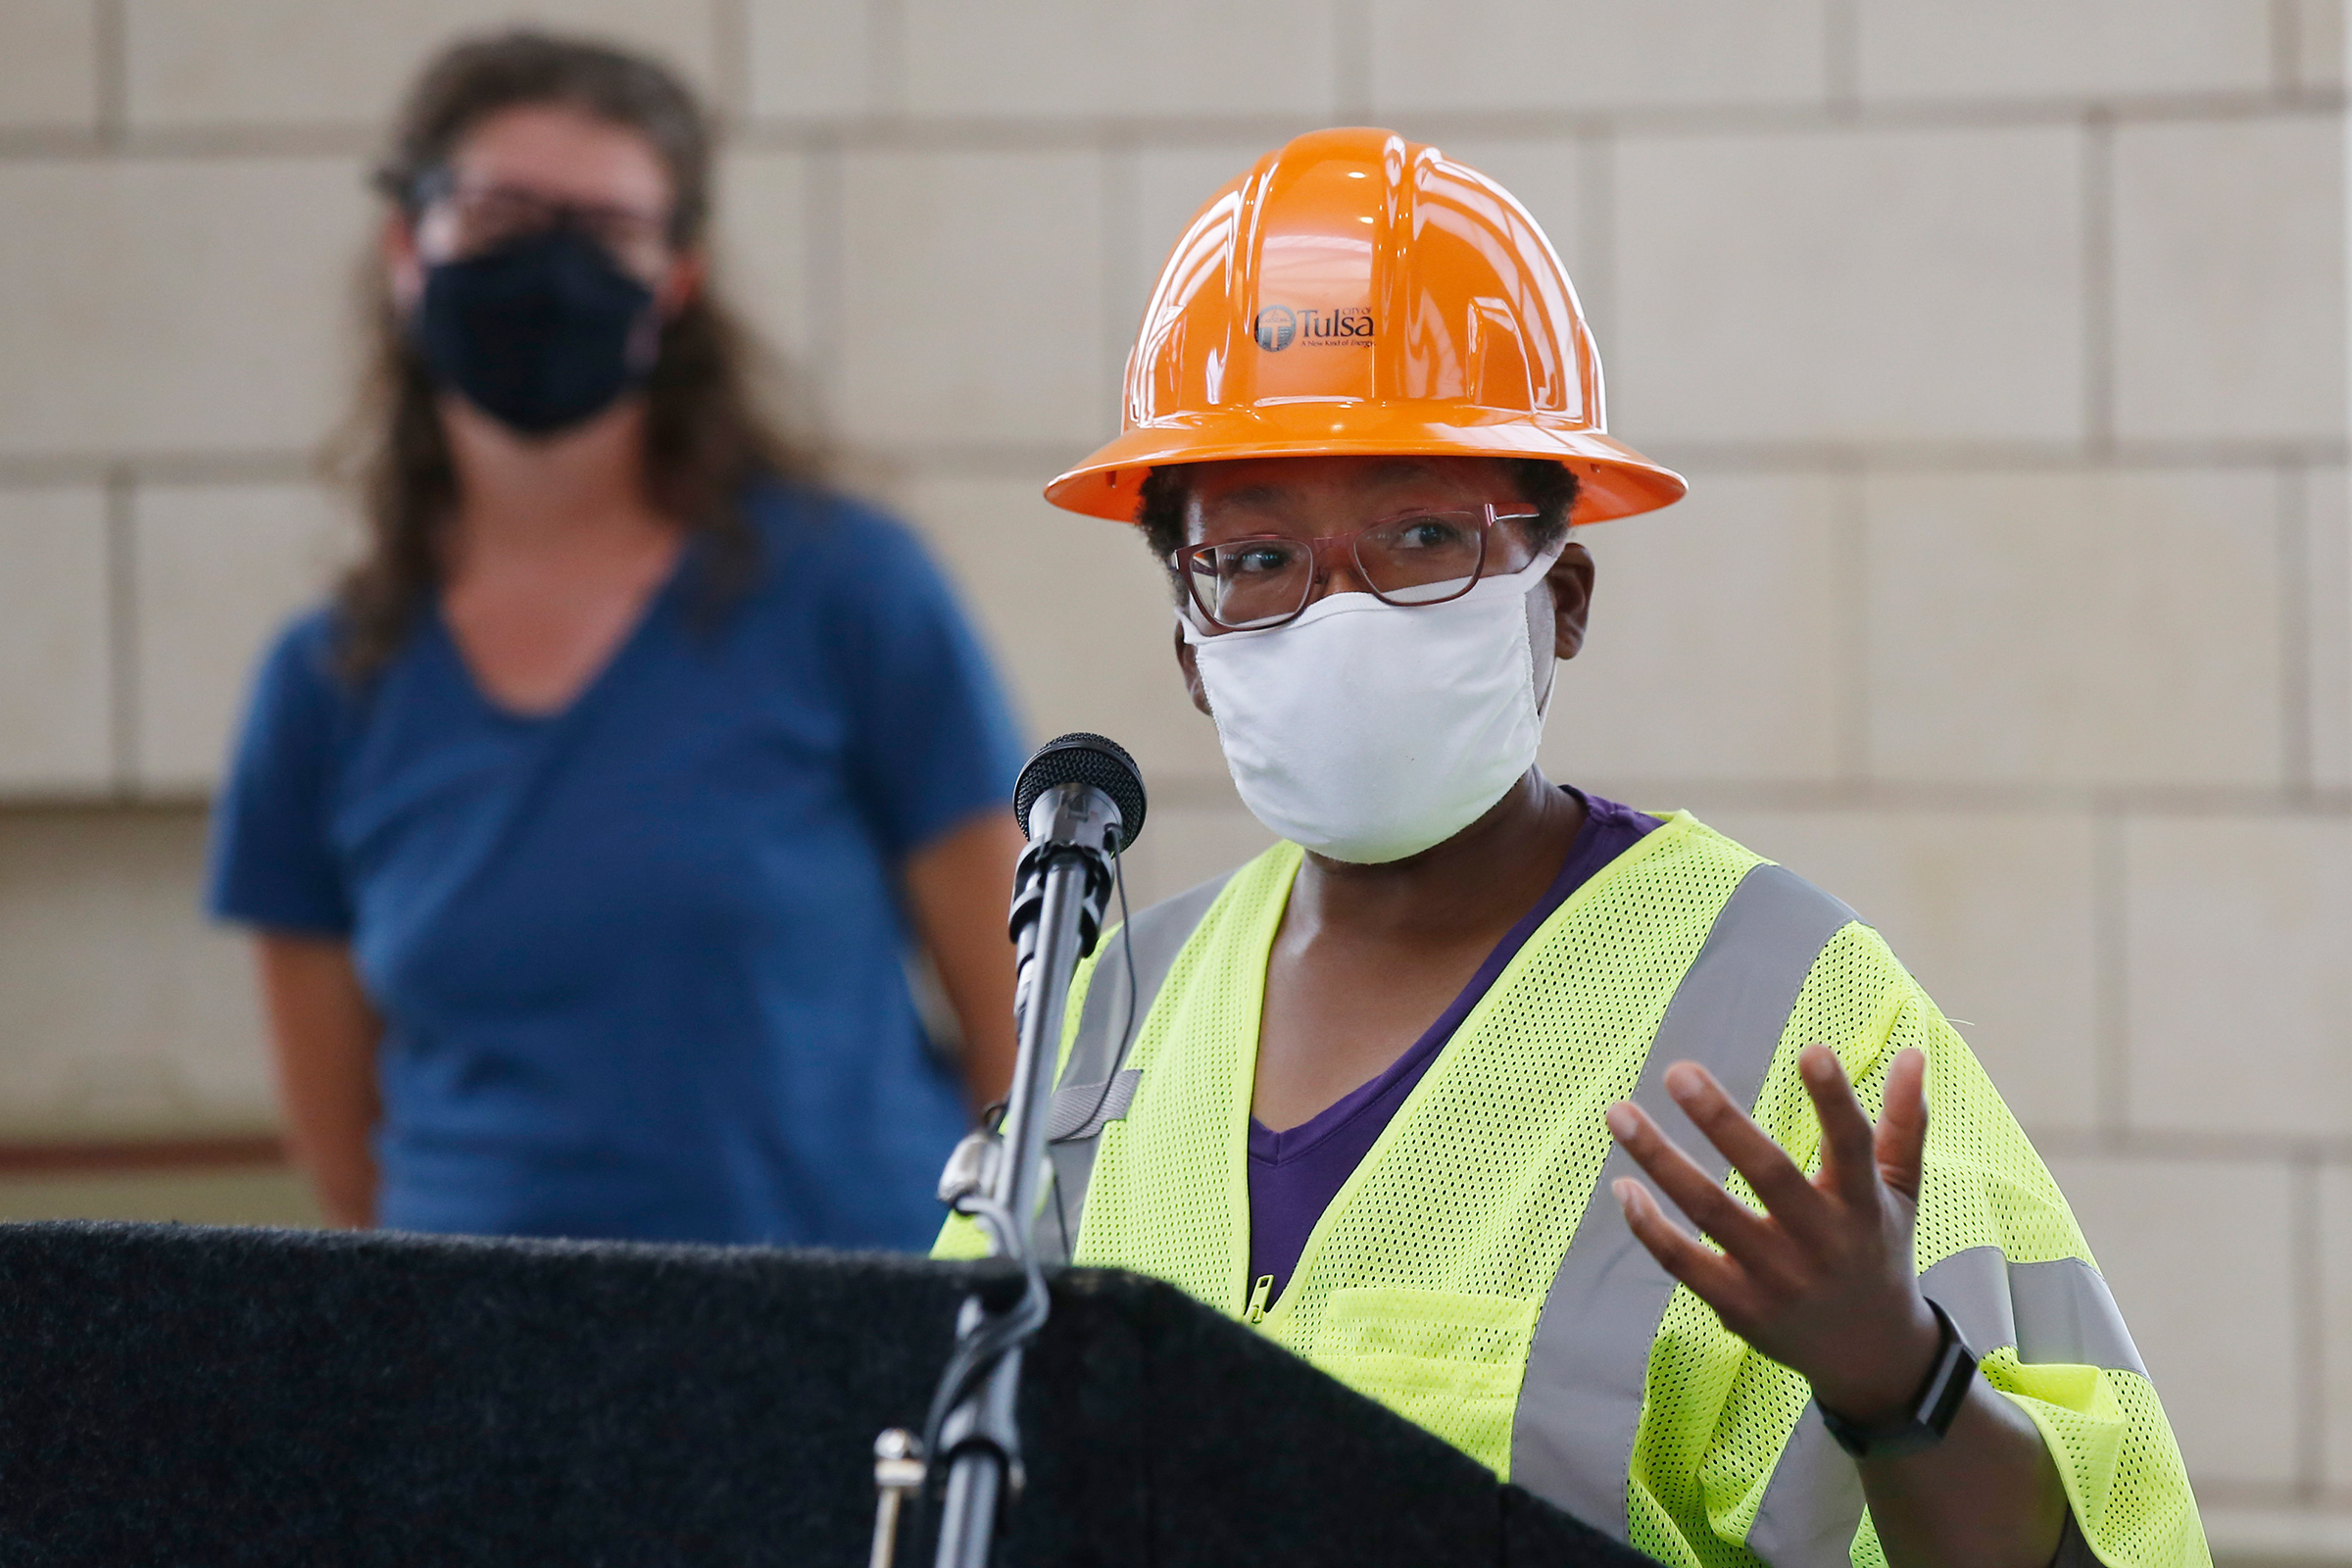 Stubblefield speaks during a news conference as work continues on an excavation of a potential unmarked mass grave from the 1921 Tulsa Race Massacre at Oaklawn Cemetery on July 14, 2020. (Sue Ogrocki—AP)